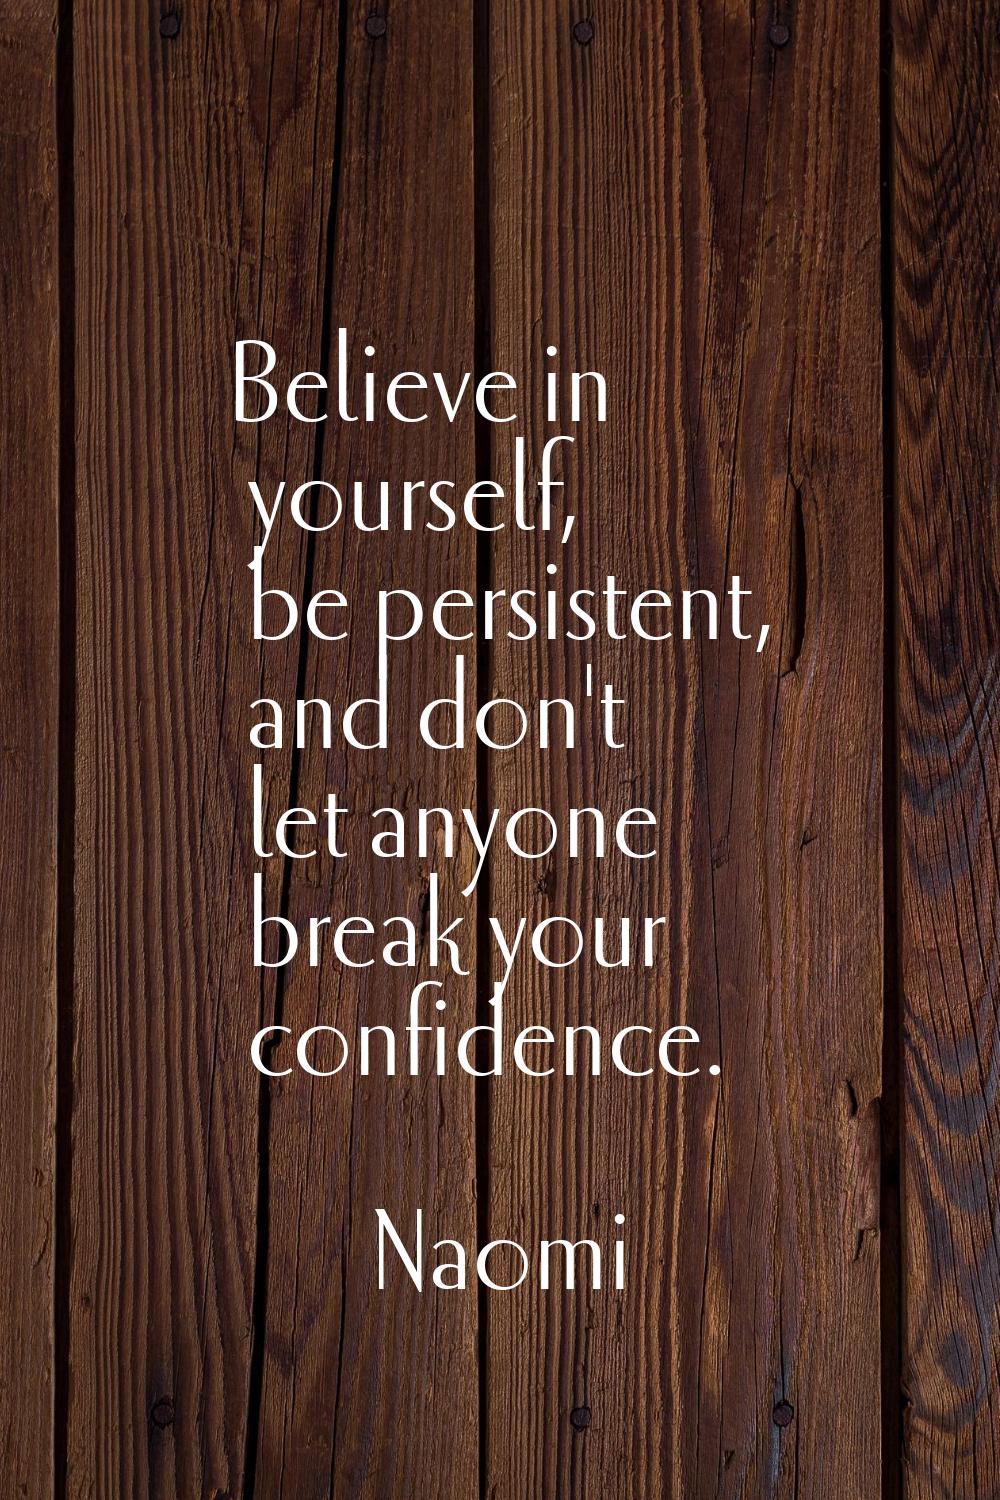 Believe in yourself, be persistent, and don't let anyone break your confidence.